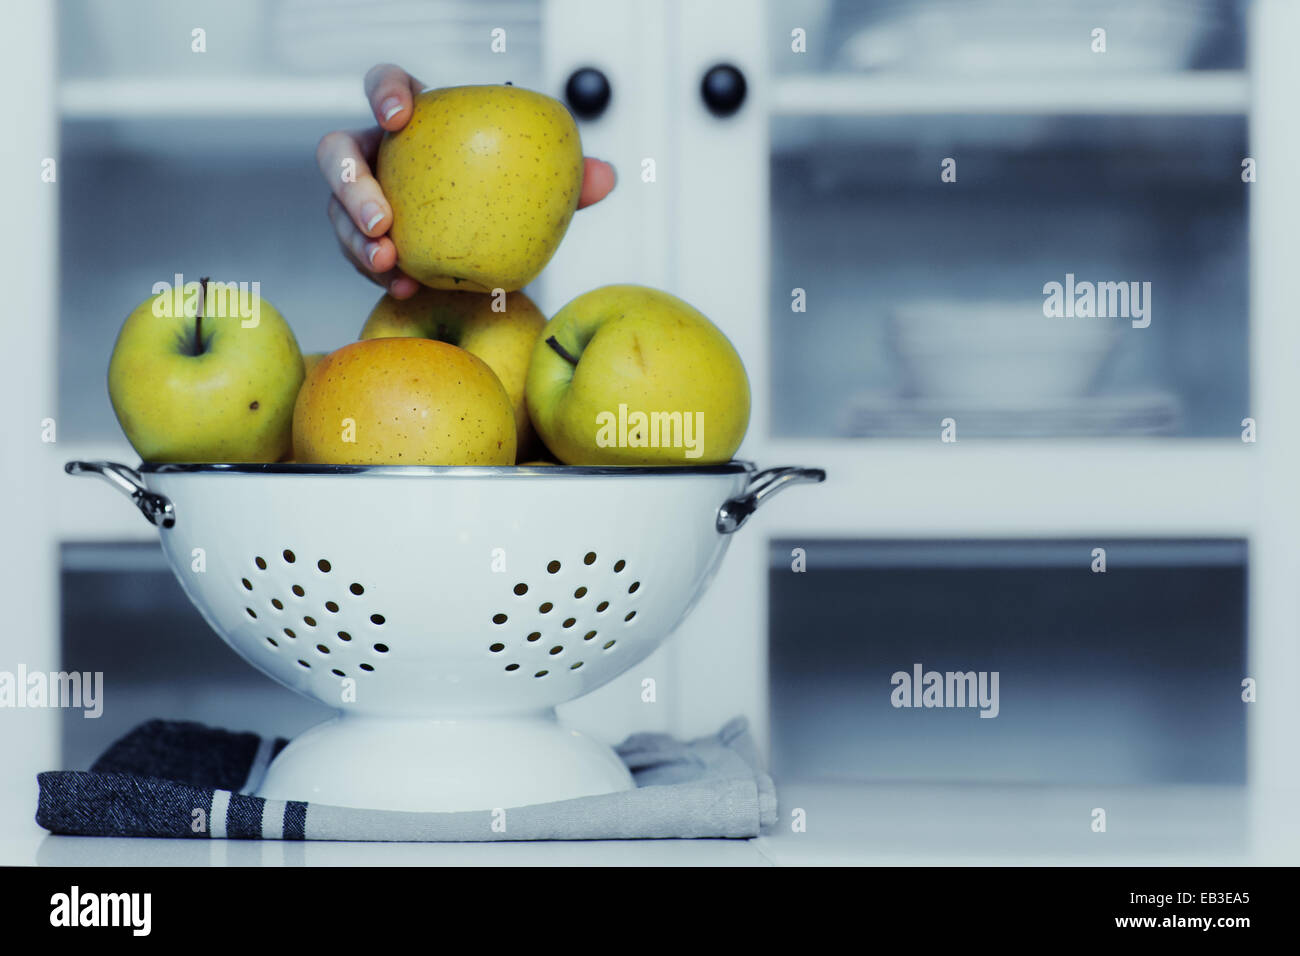 Human hand taking an apple from colander in kitchen Stock Photo